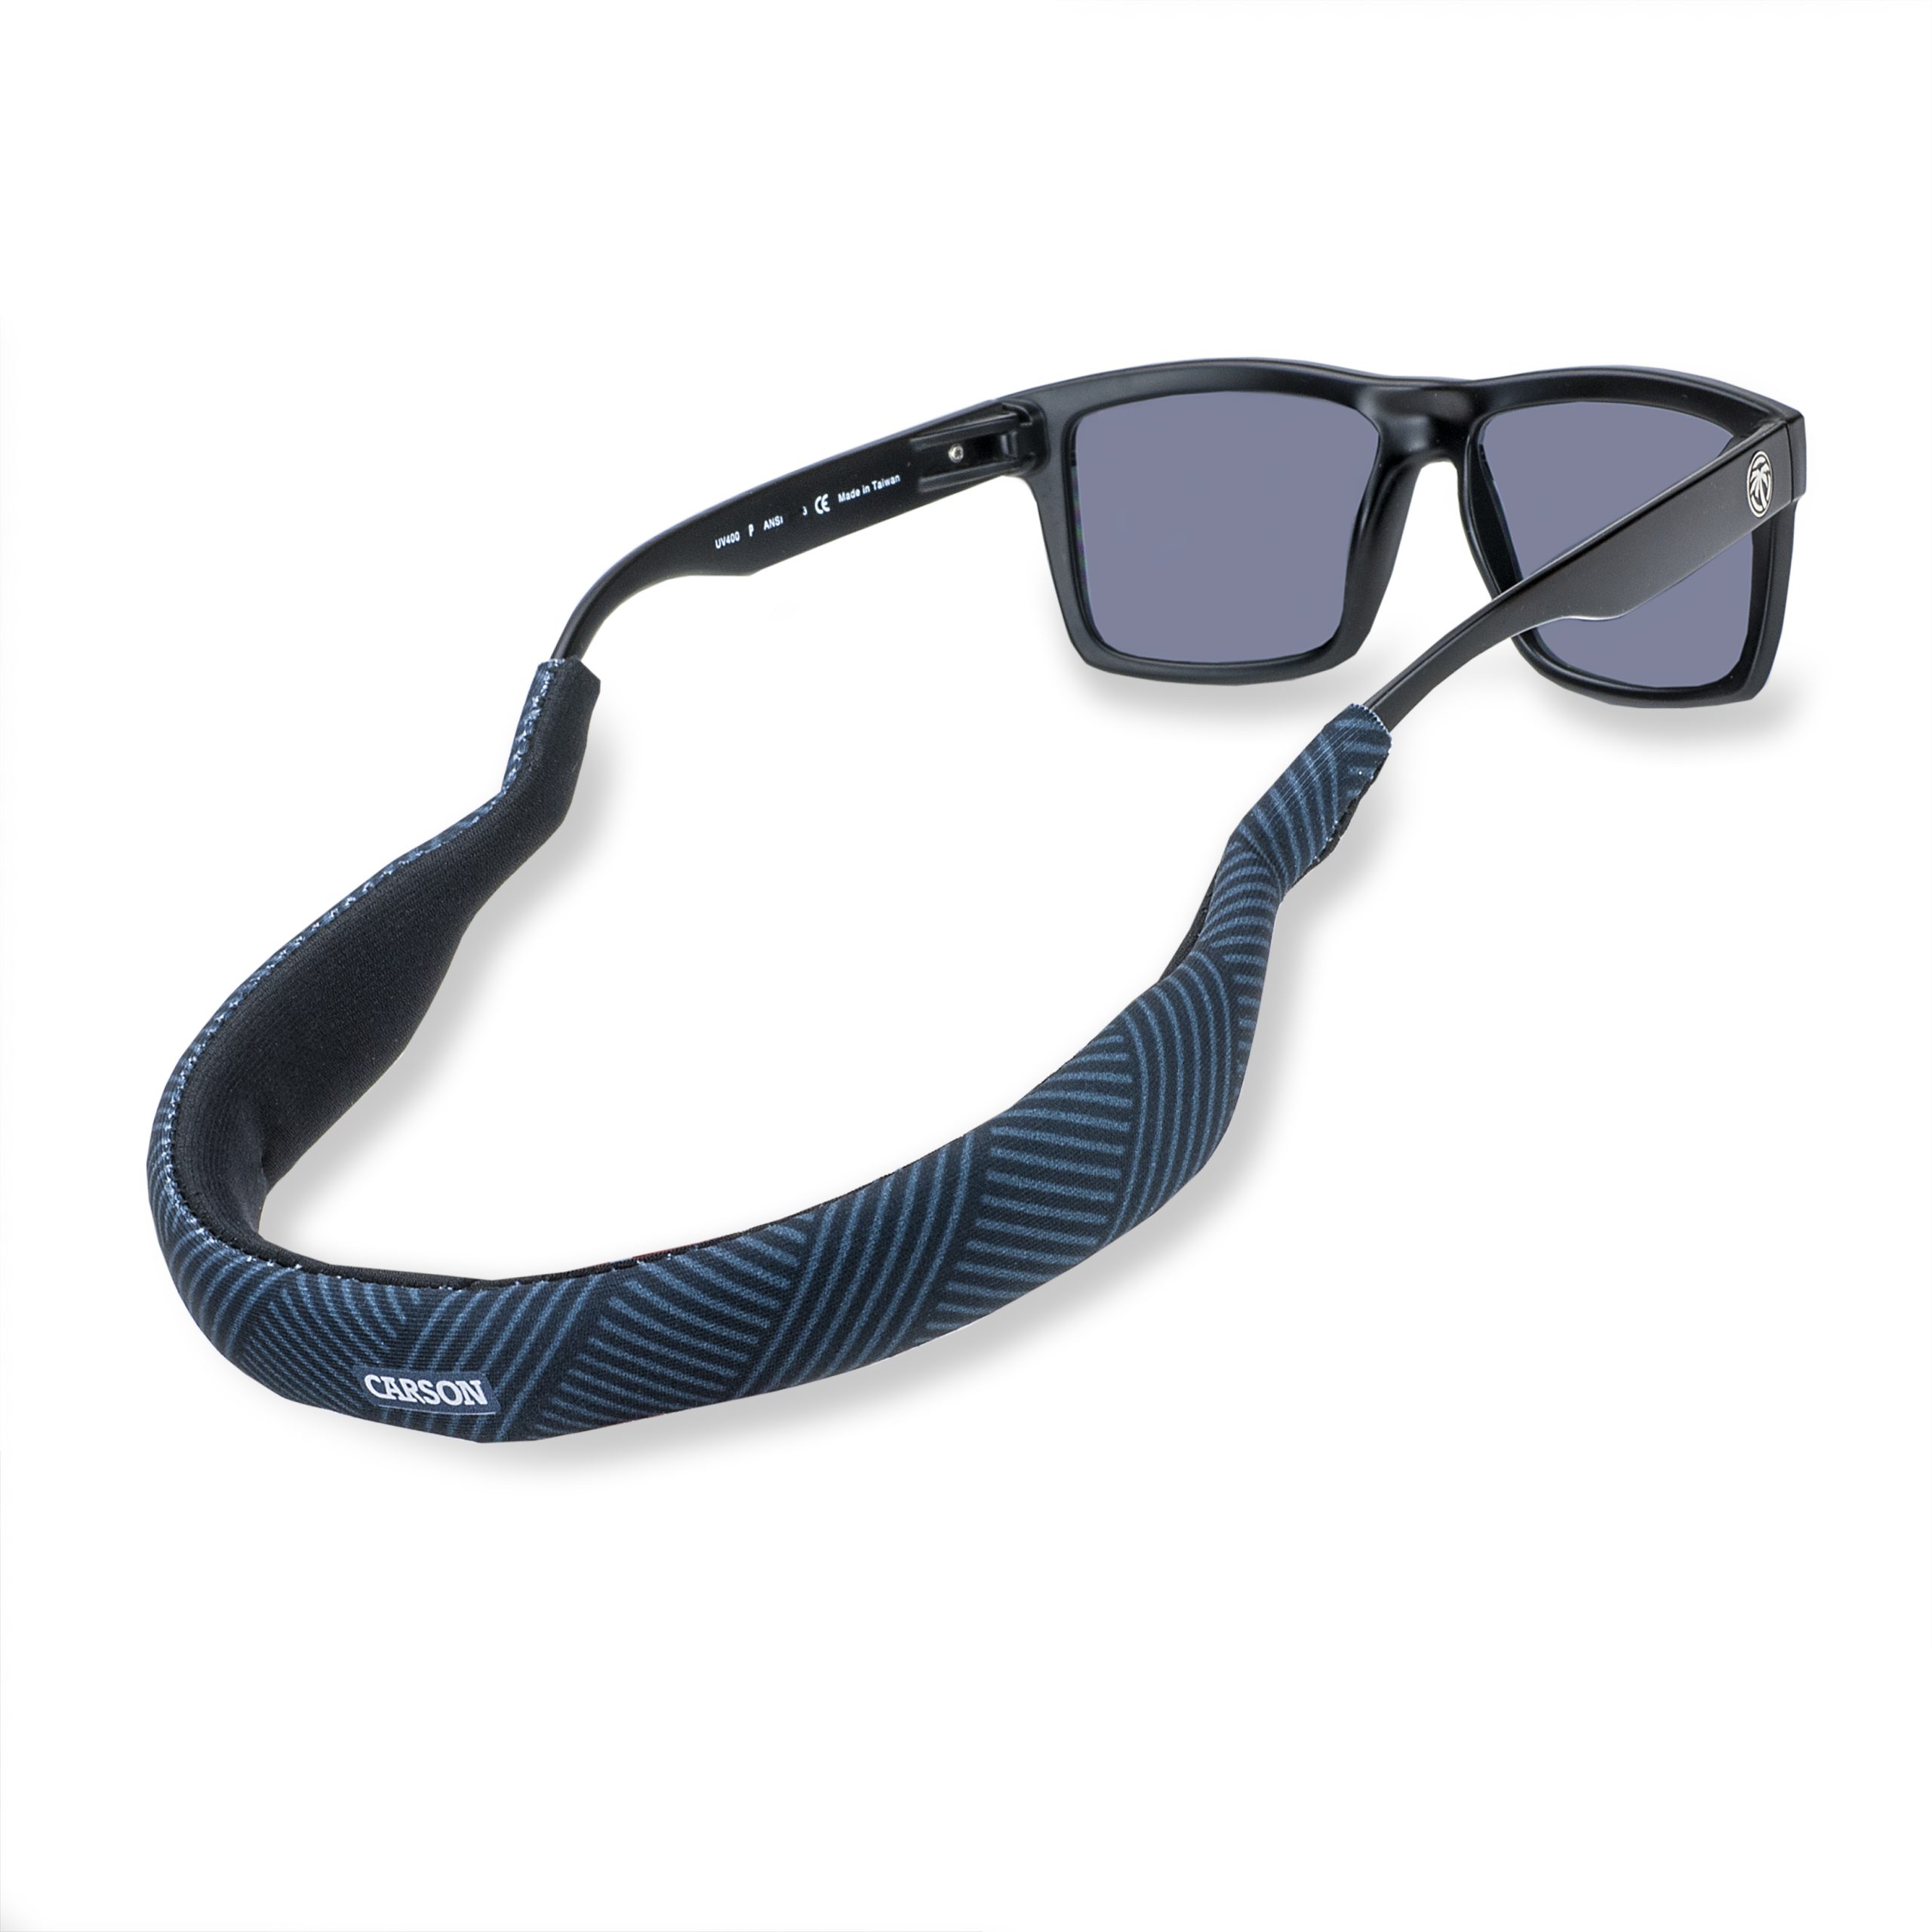 Carson Floating Eyewear Retainer with Foam-Core Technology, Graphite